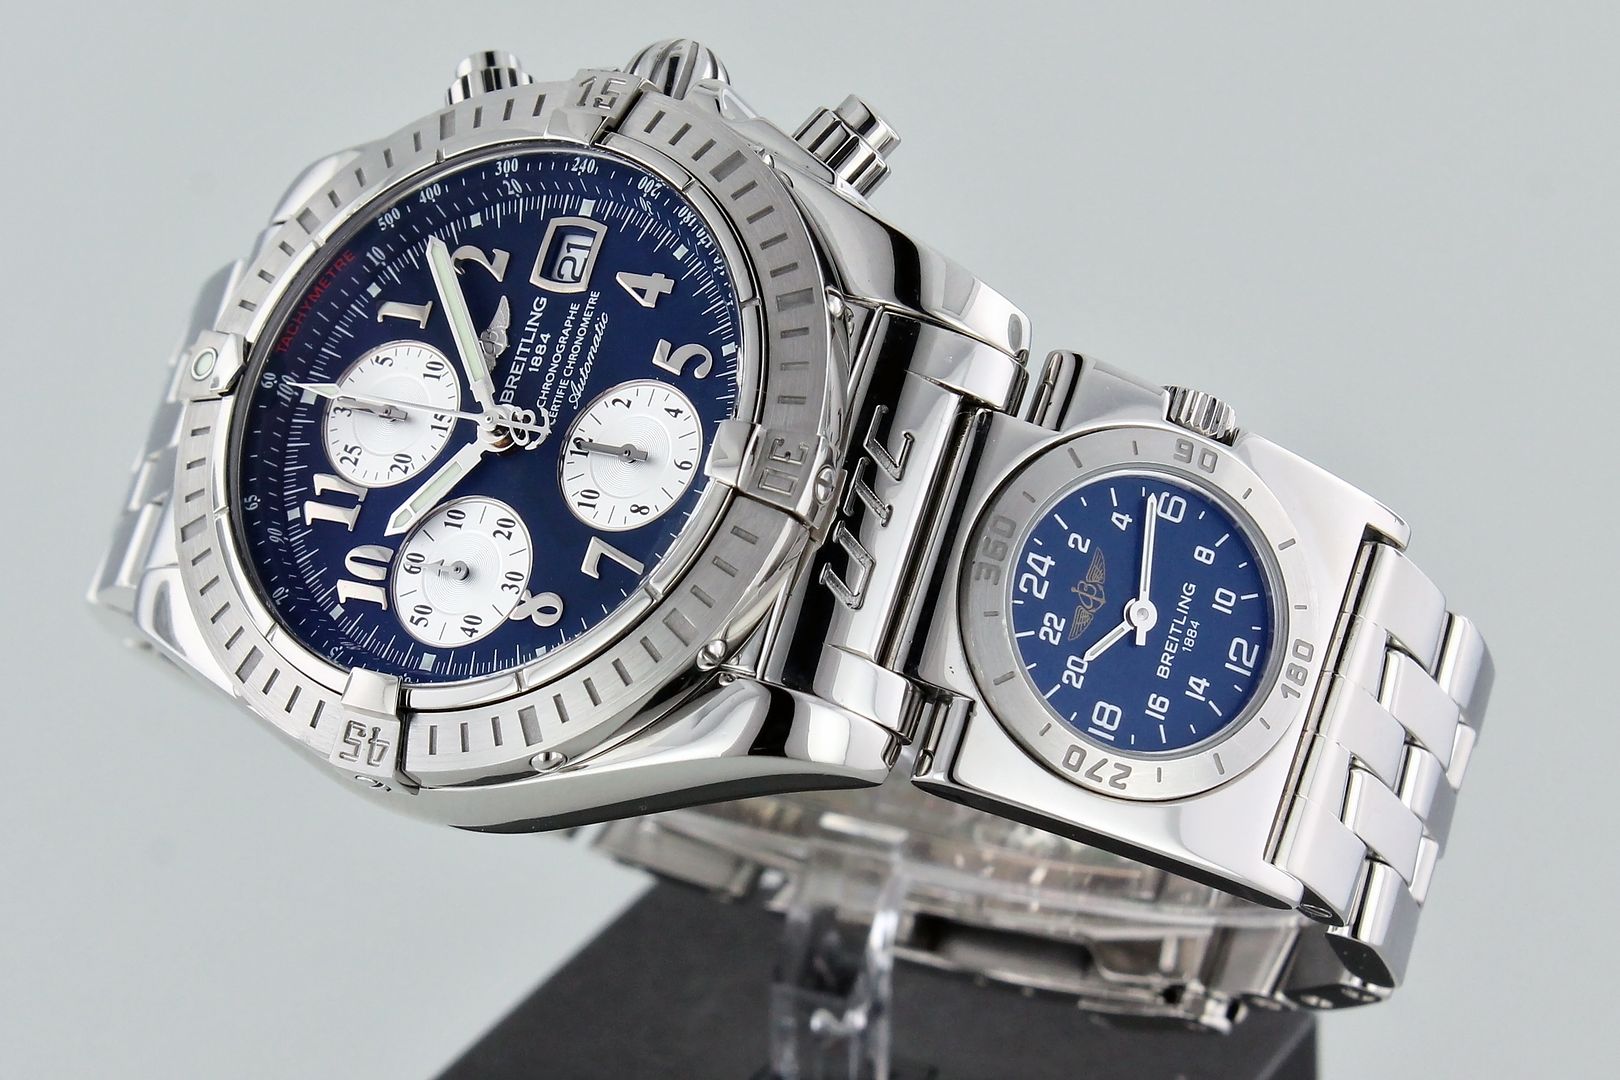 SOLD- Breitling A13356 A70177 Evo with 